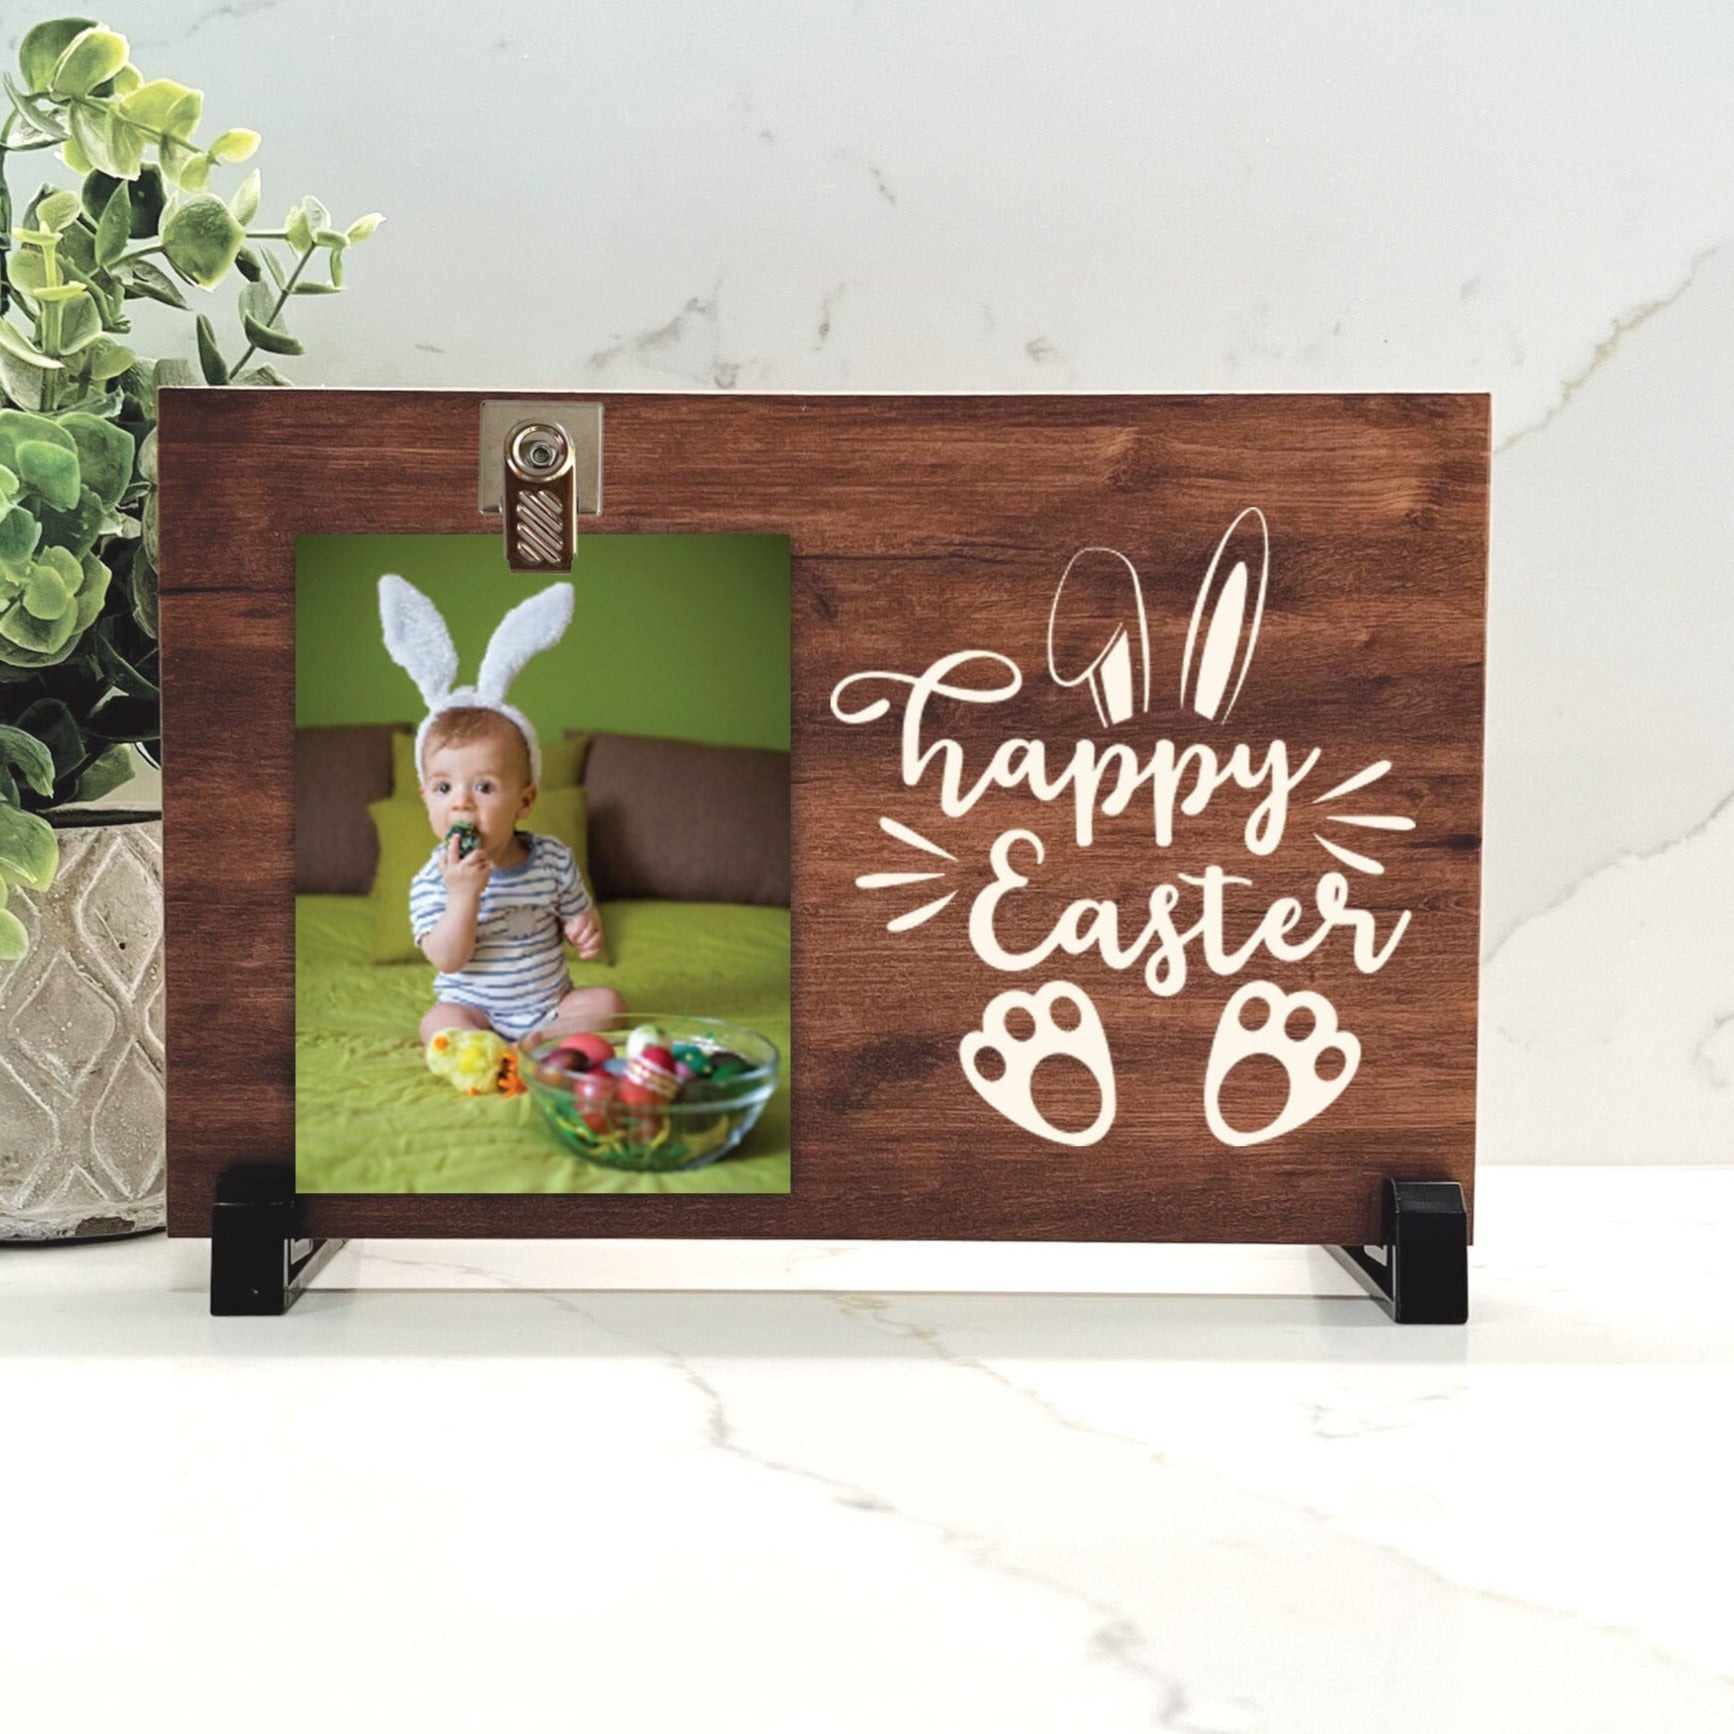 Customize your cherished moments with our Easter Picture Frame available at www.florida-funshine.com. Create a heartfelt gift for family and friends with free personalization, quick shipping in 1-2 business days, and quality crafted picture frames, portraits, and plaques made in the USA."